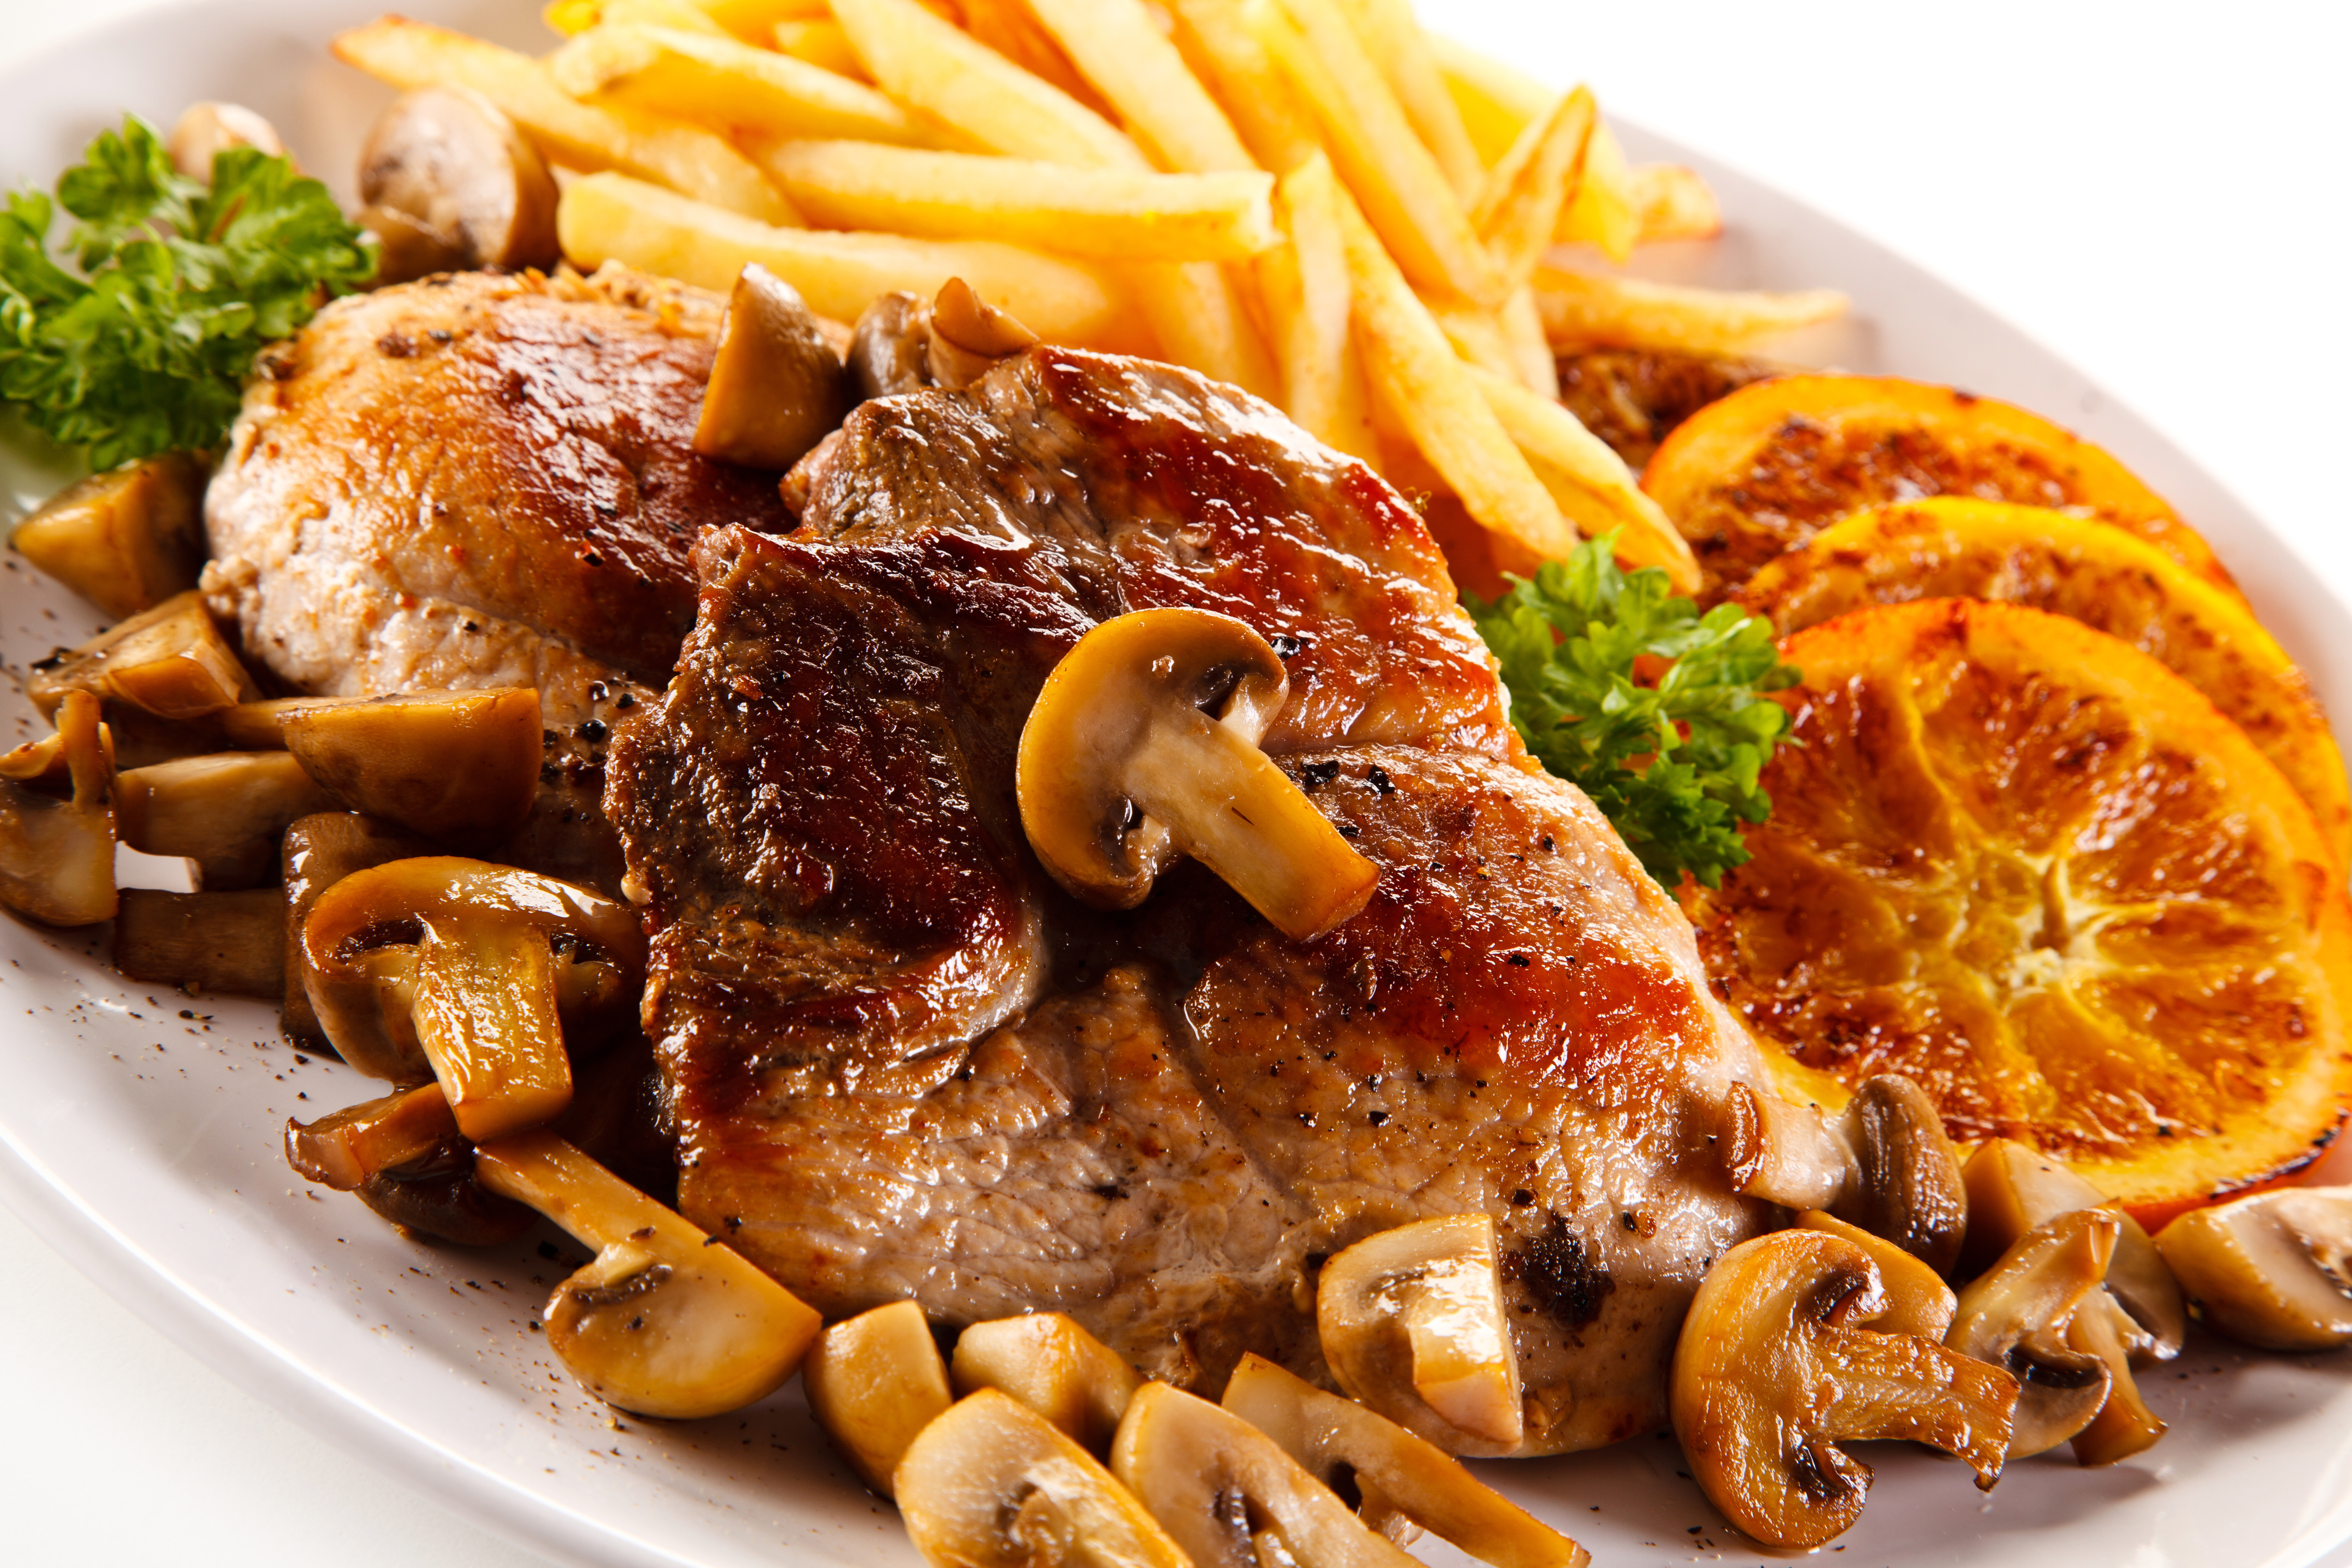 French Fries Meal Meat Mushroom 5616x3744